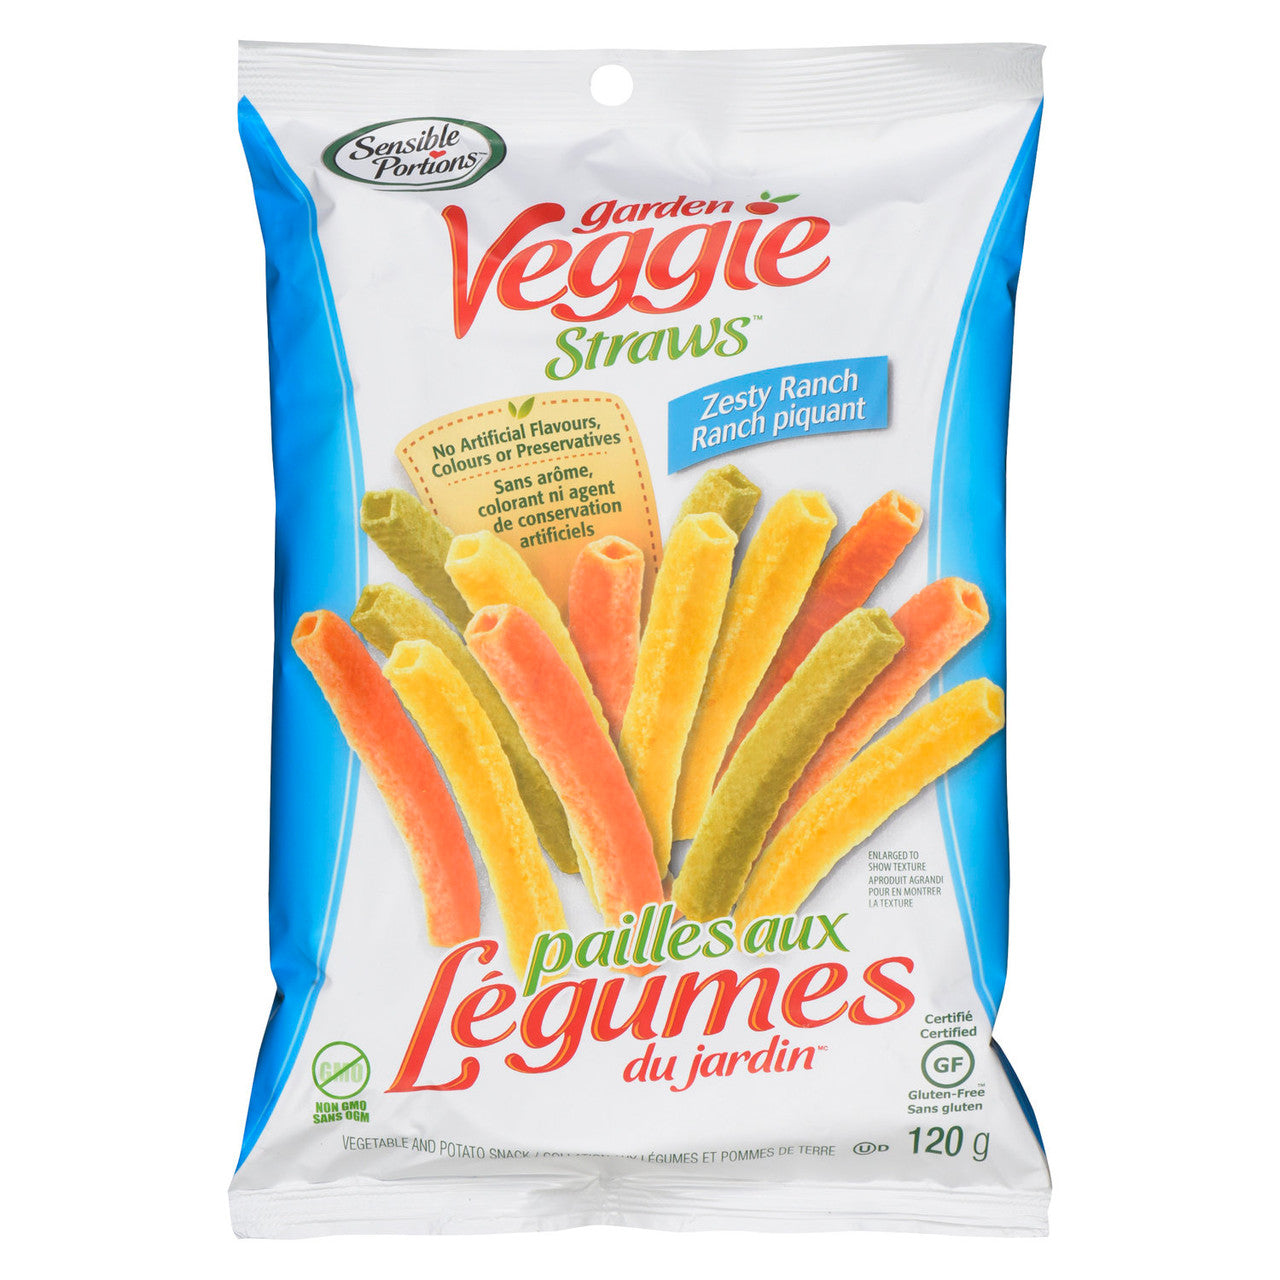 Sensible Portions Veggie Straws, Zesty Ranch, 120g/4.2 oz. {Imported from Canada}